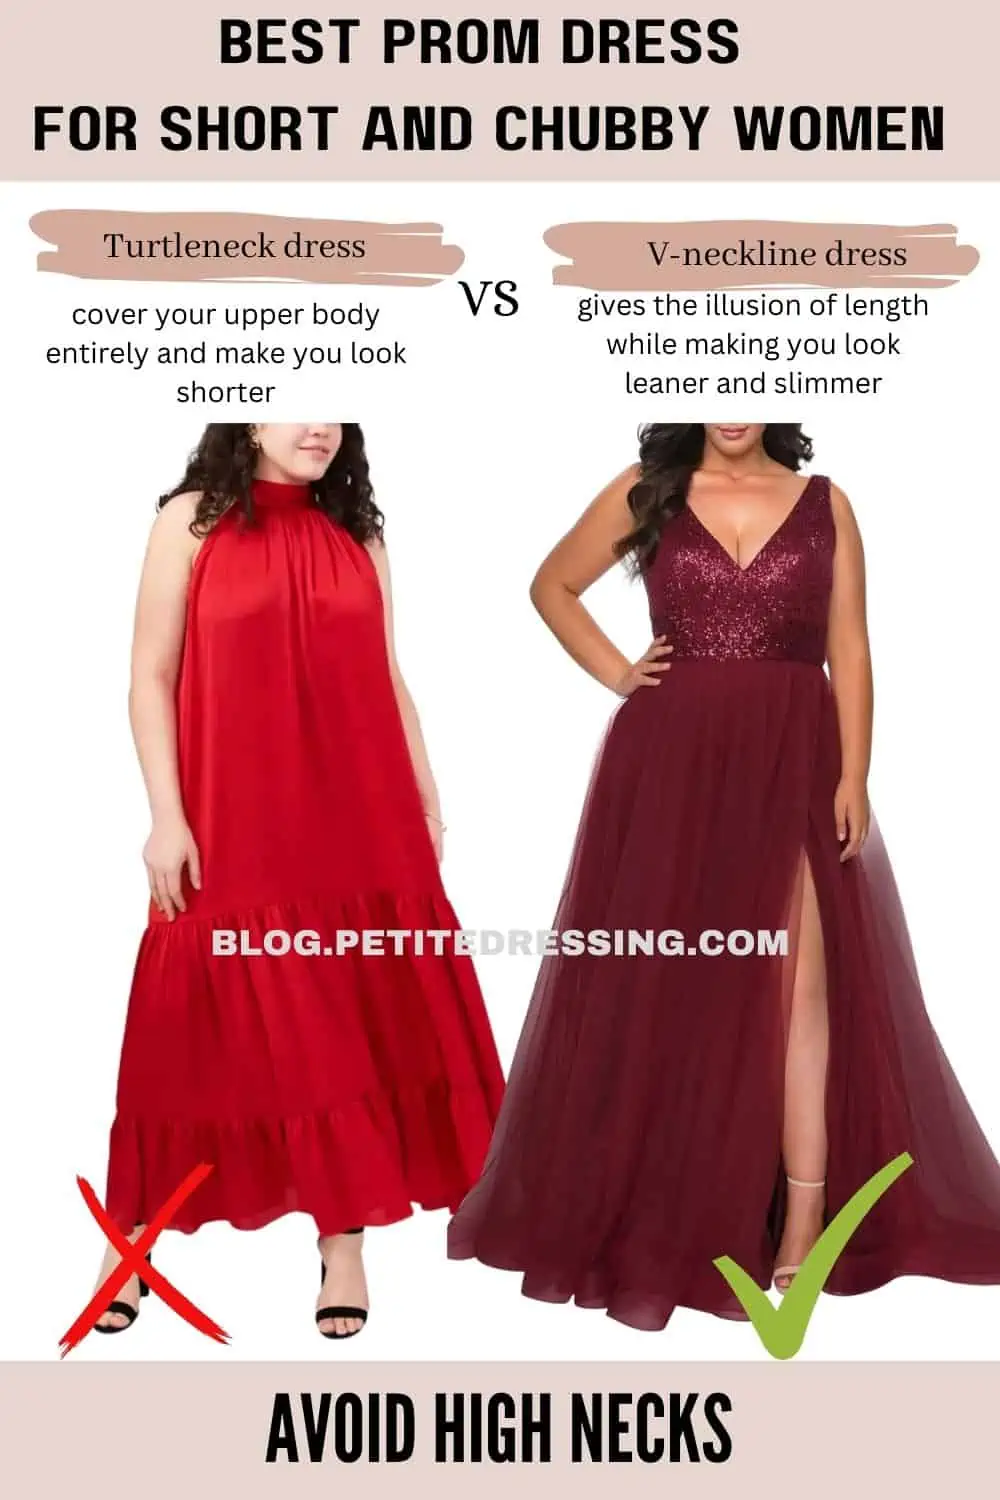 evening dresses for fat people